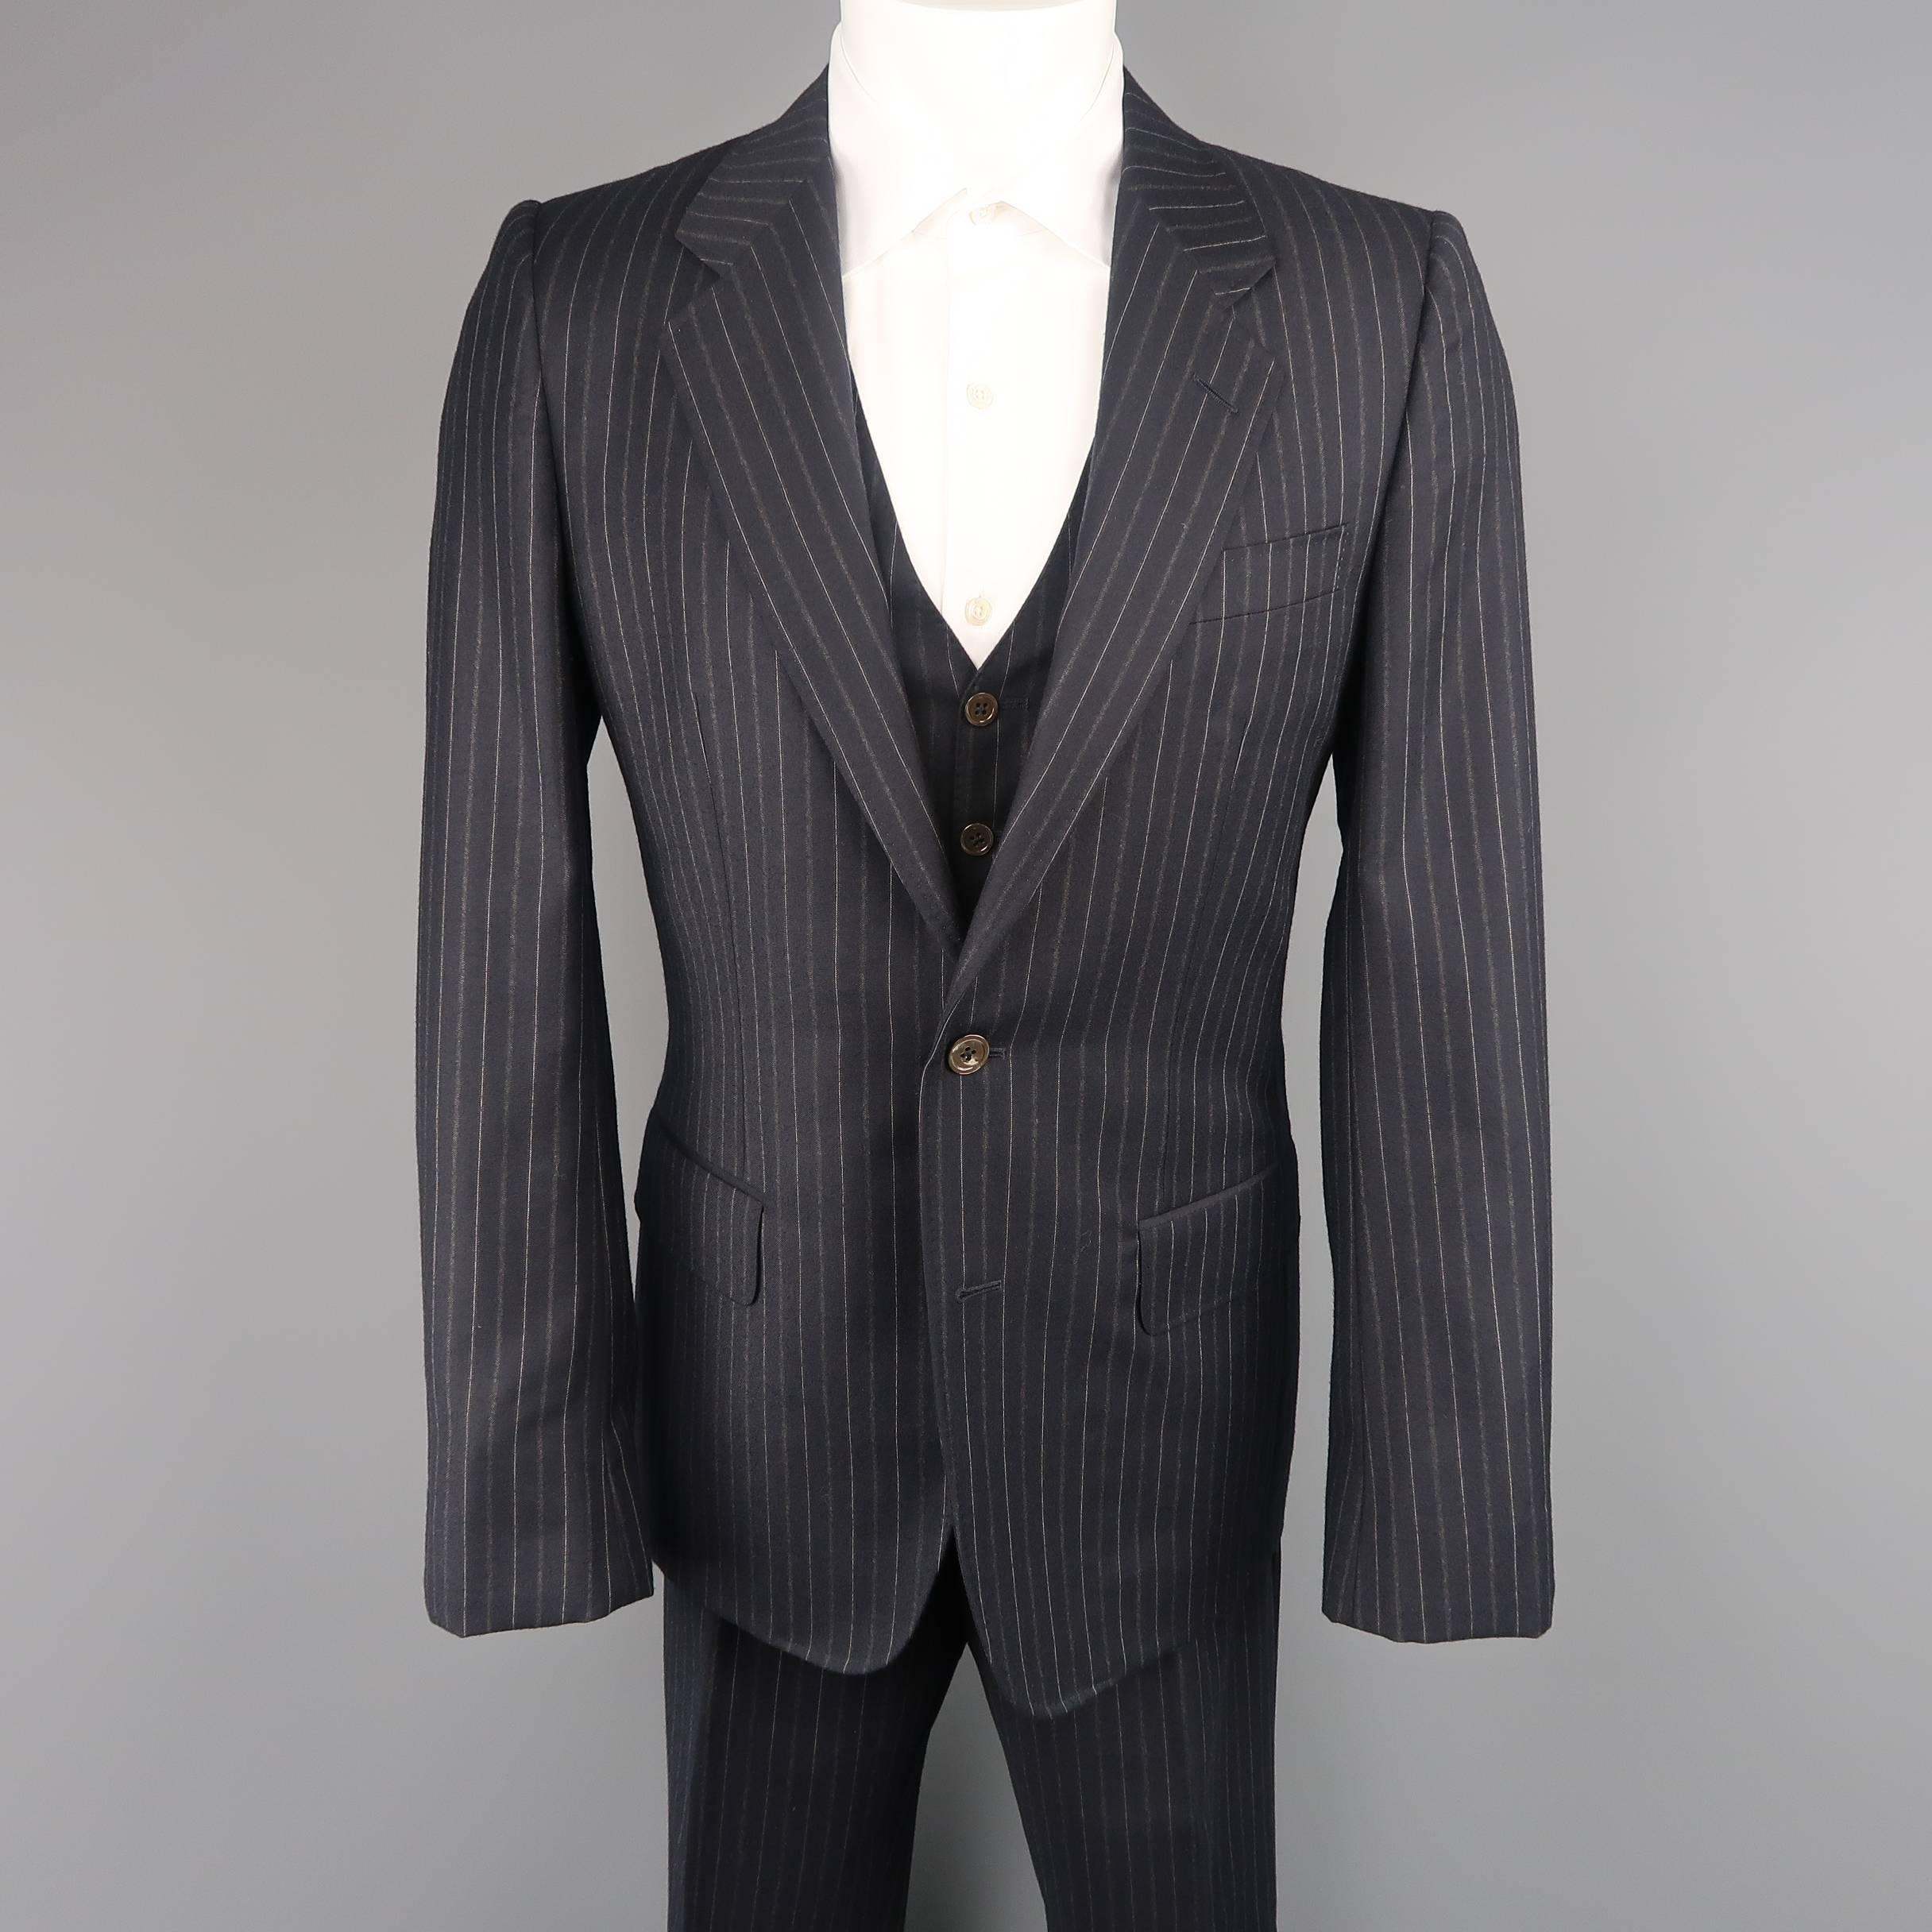 Three piece YVES SAINT LAURENT suit by TOM FORD comes in navy and grey pinstripe pattern wool and includes a single breasted, two button, notch lapel sport coat with button tab cuff, a V neck vest, and flat front trousers. Made in Italy.
 
Excellent